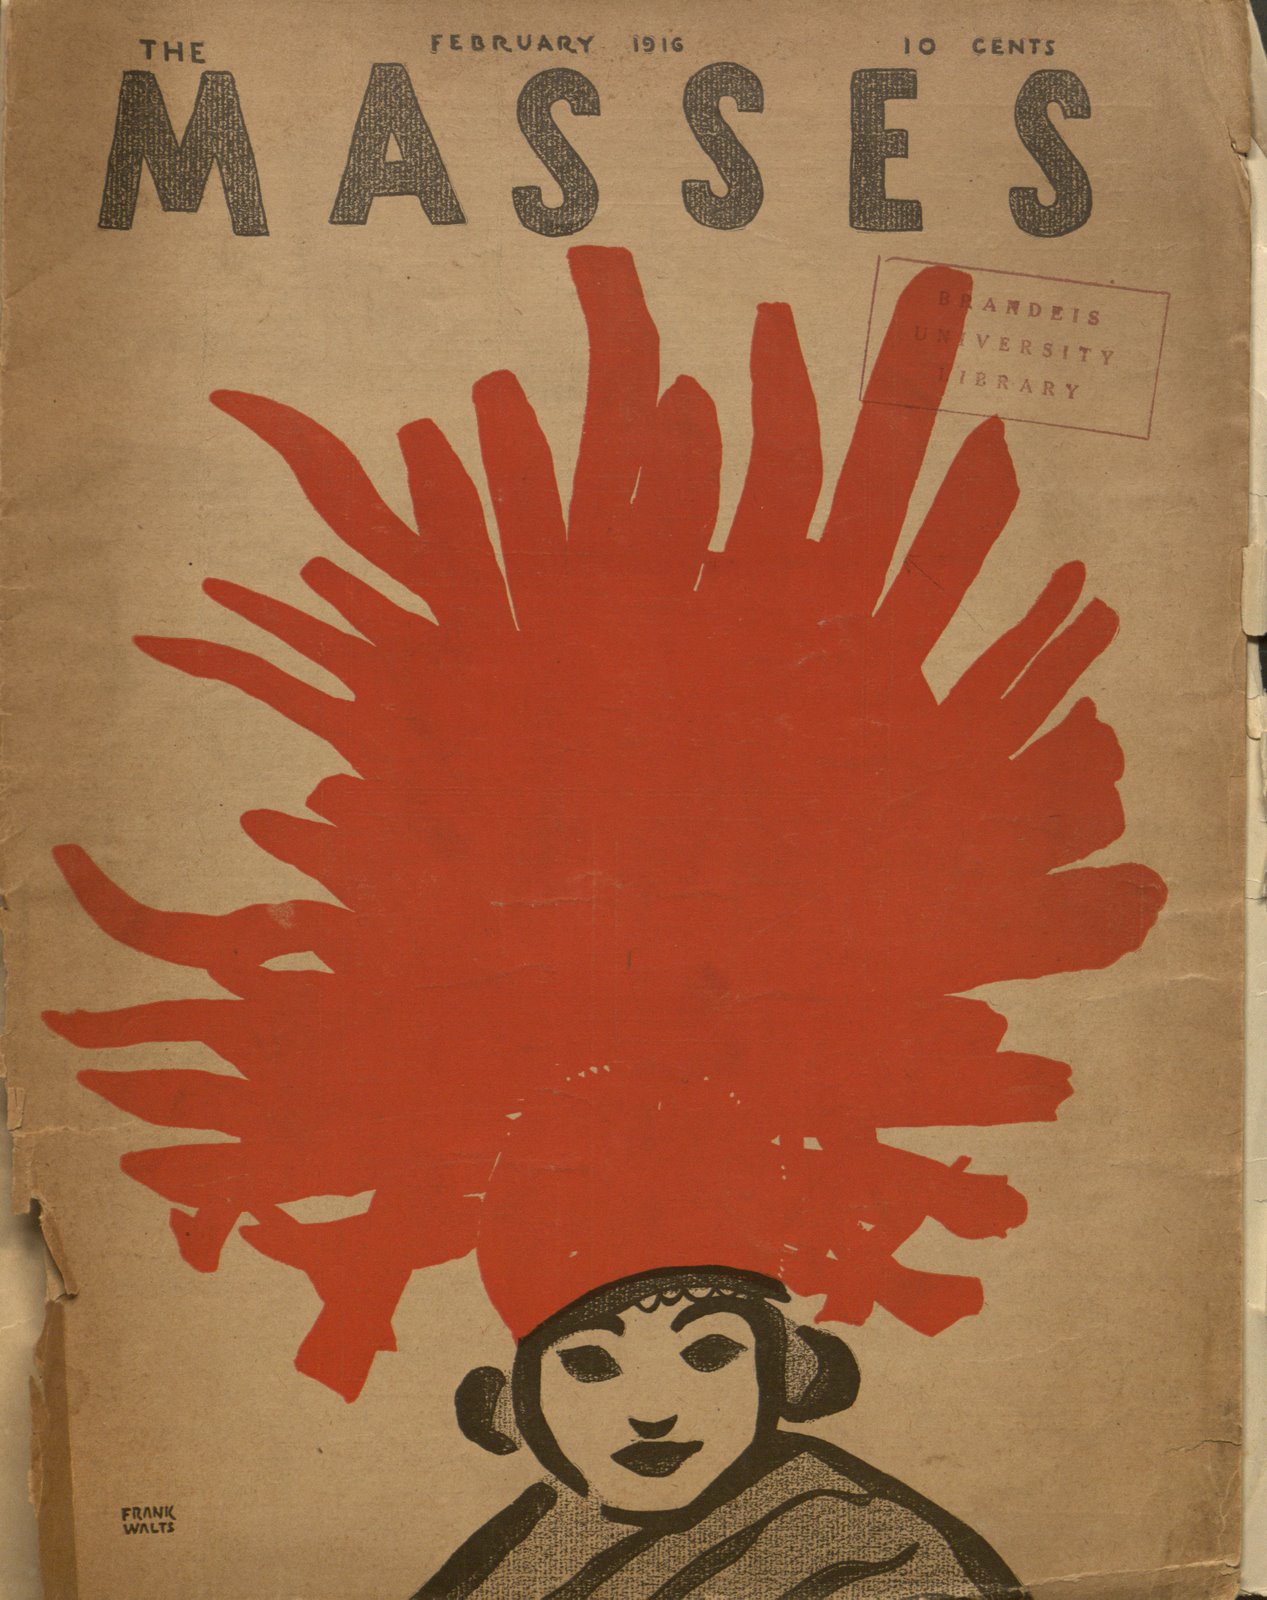 Labor radicalism magazine The Masses from 1916 with an illustration of a person wearing a large red headpiece